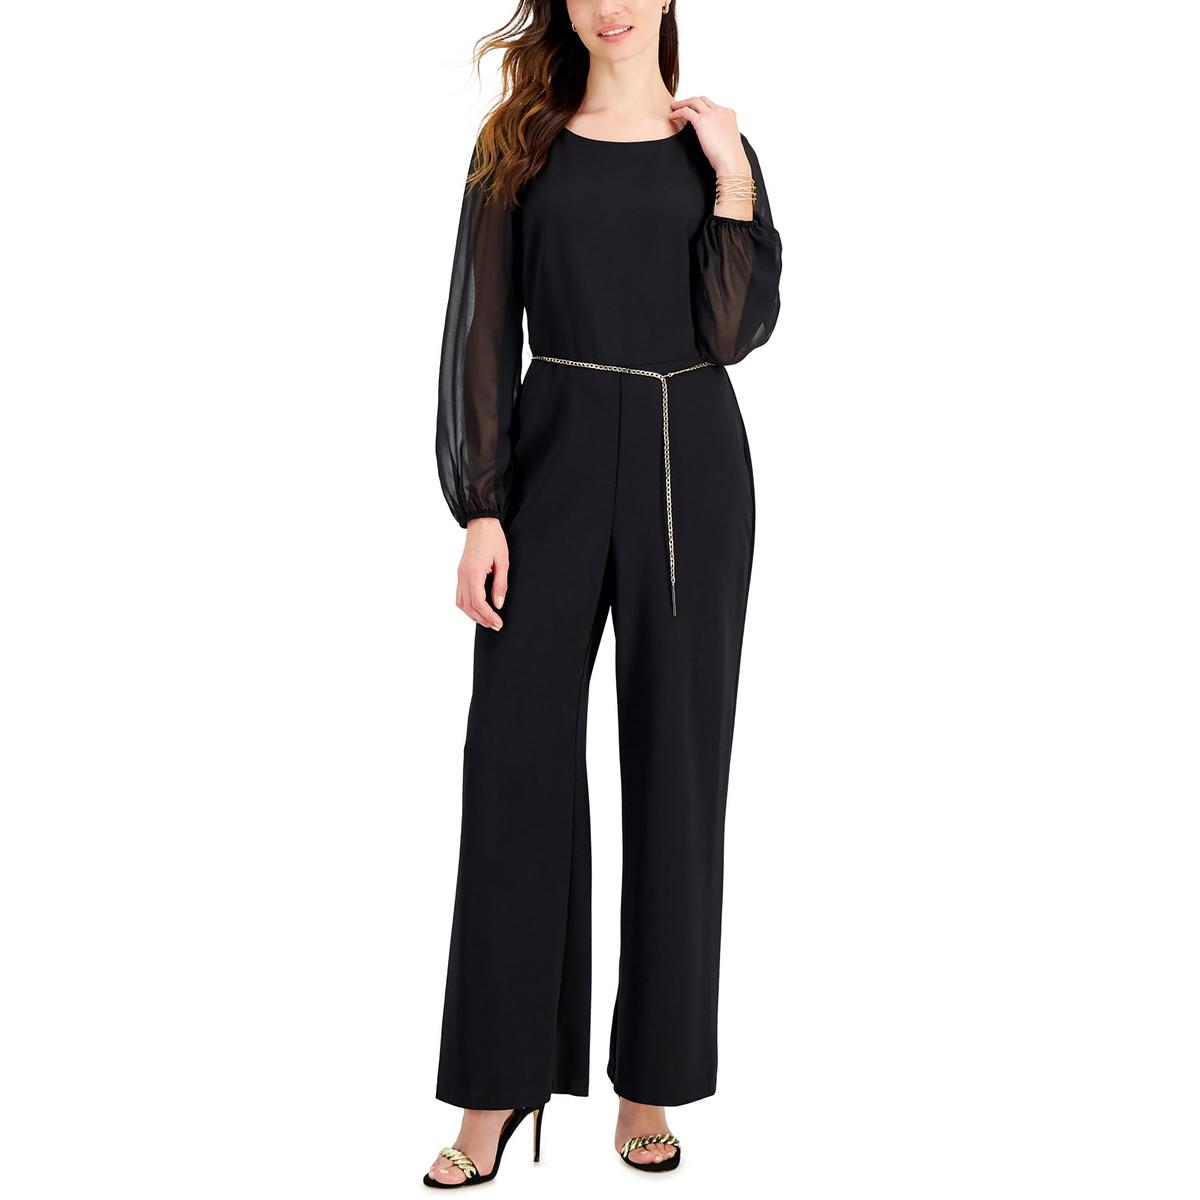 Connected Apparel Womens Sheer Boatneck Jumpsuit